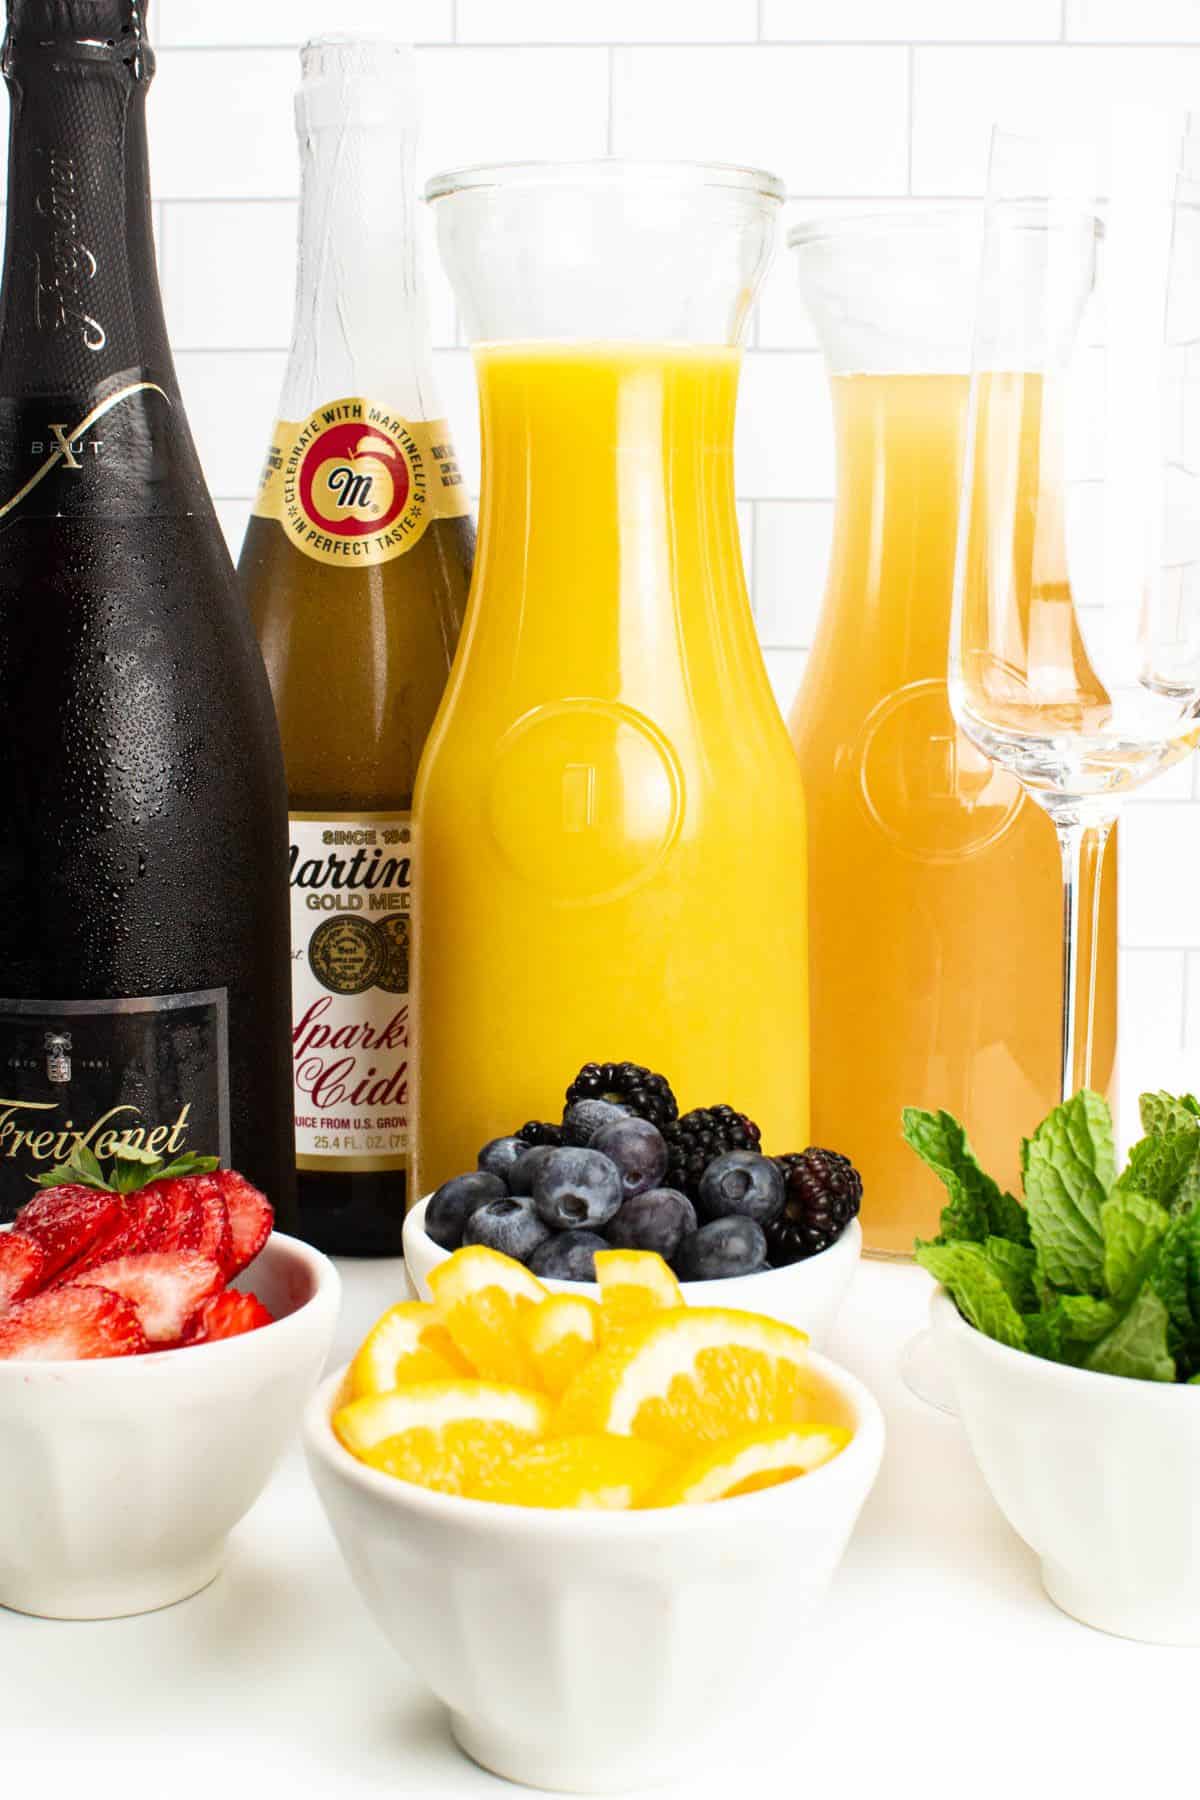 Different varieties of sparkling wines and juices in bottles, different varieties of fruits in white bowls.